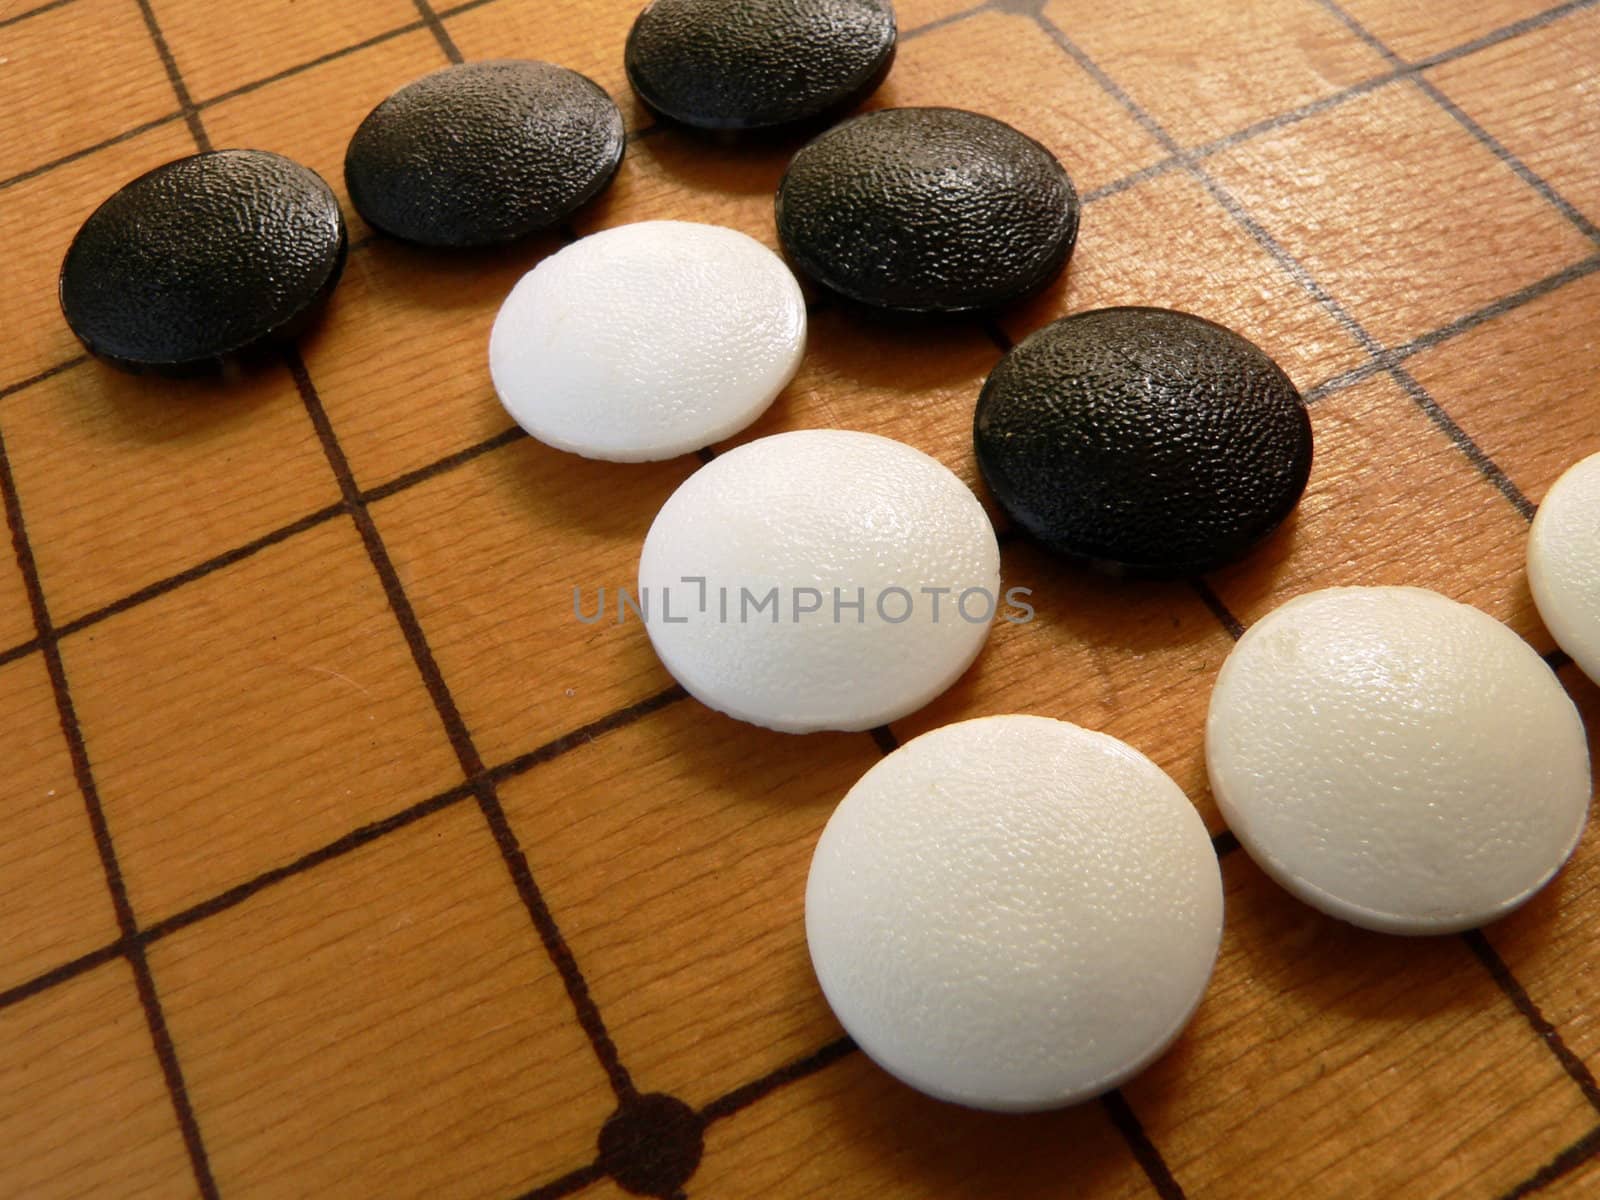 Black and white stones on the go-board.